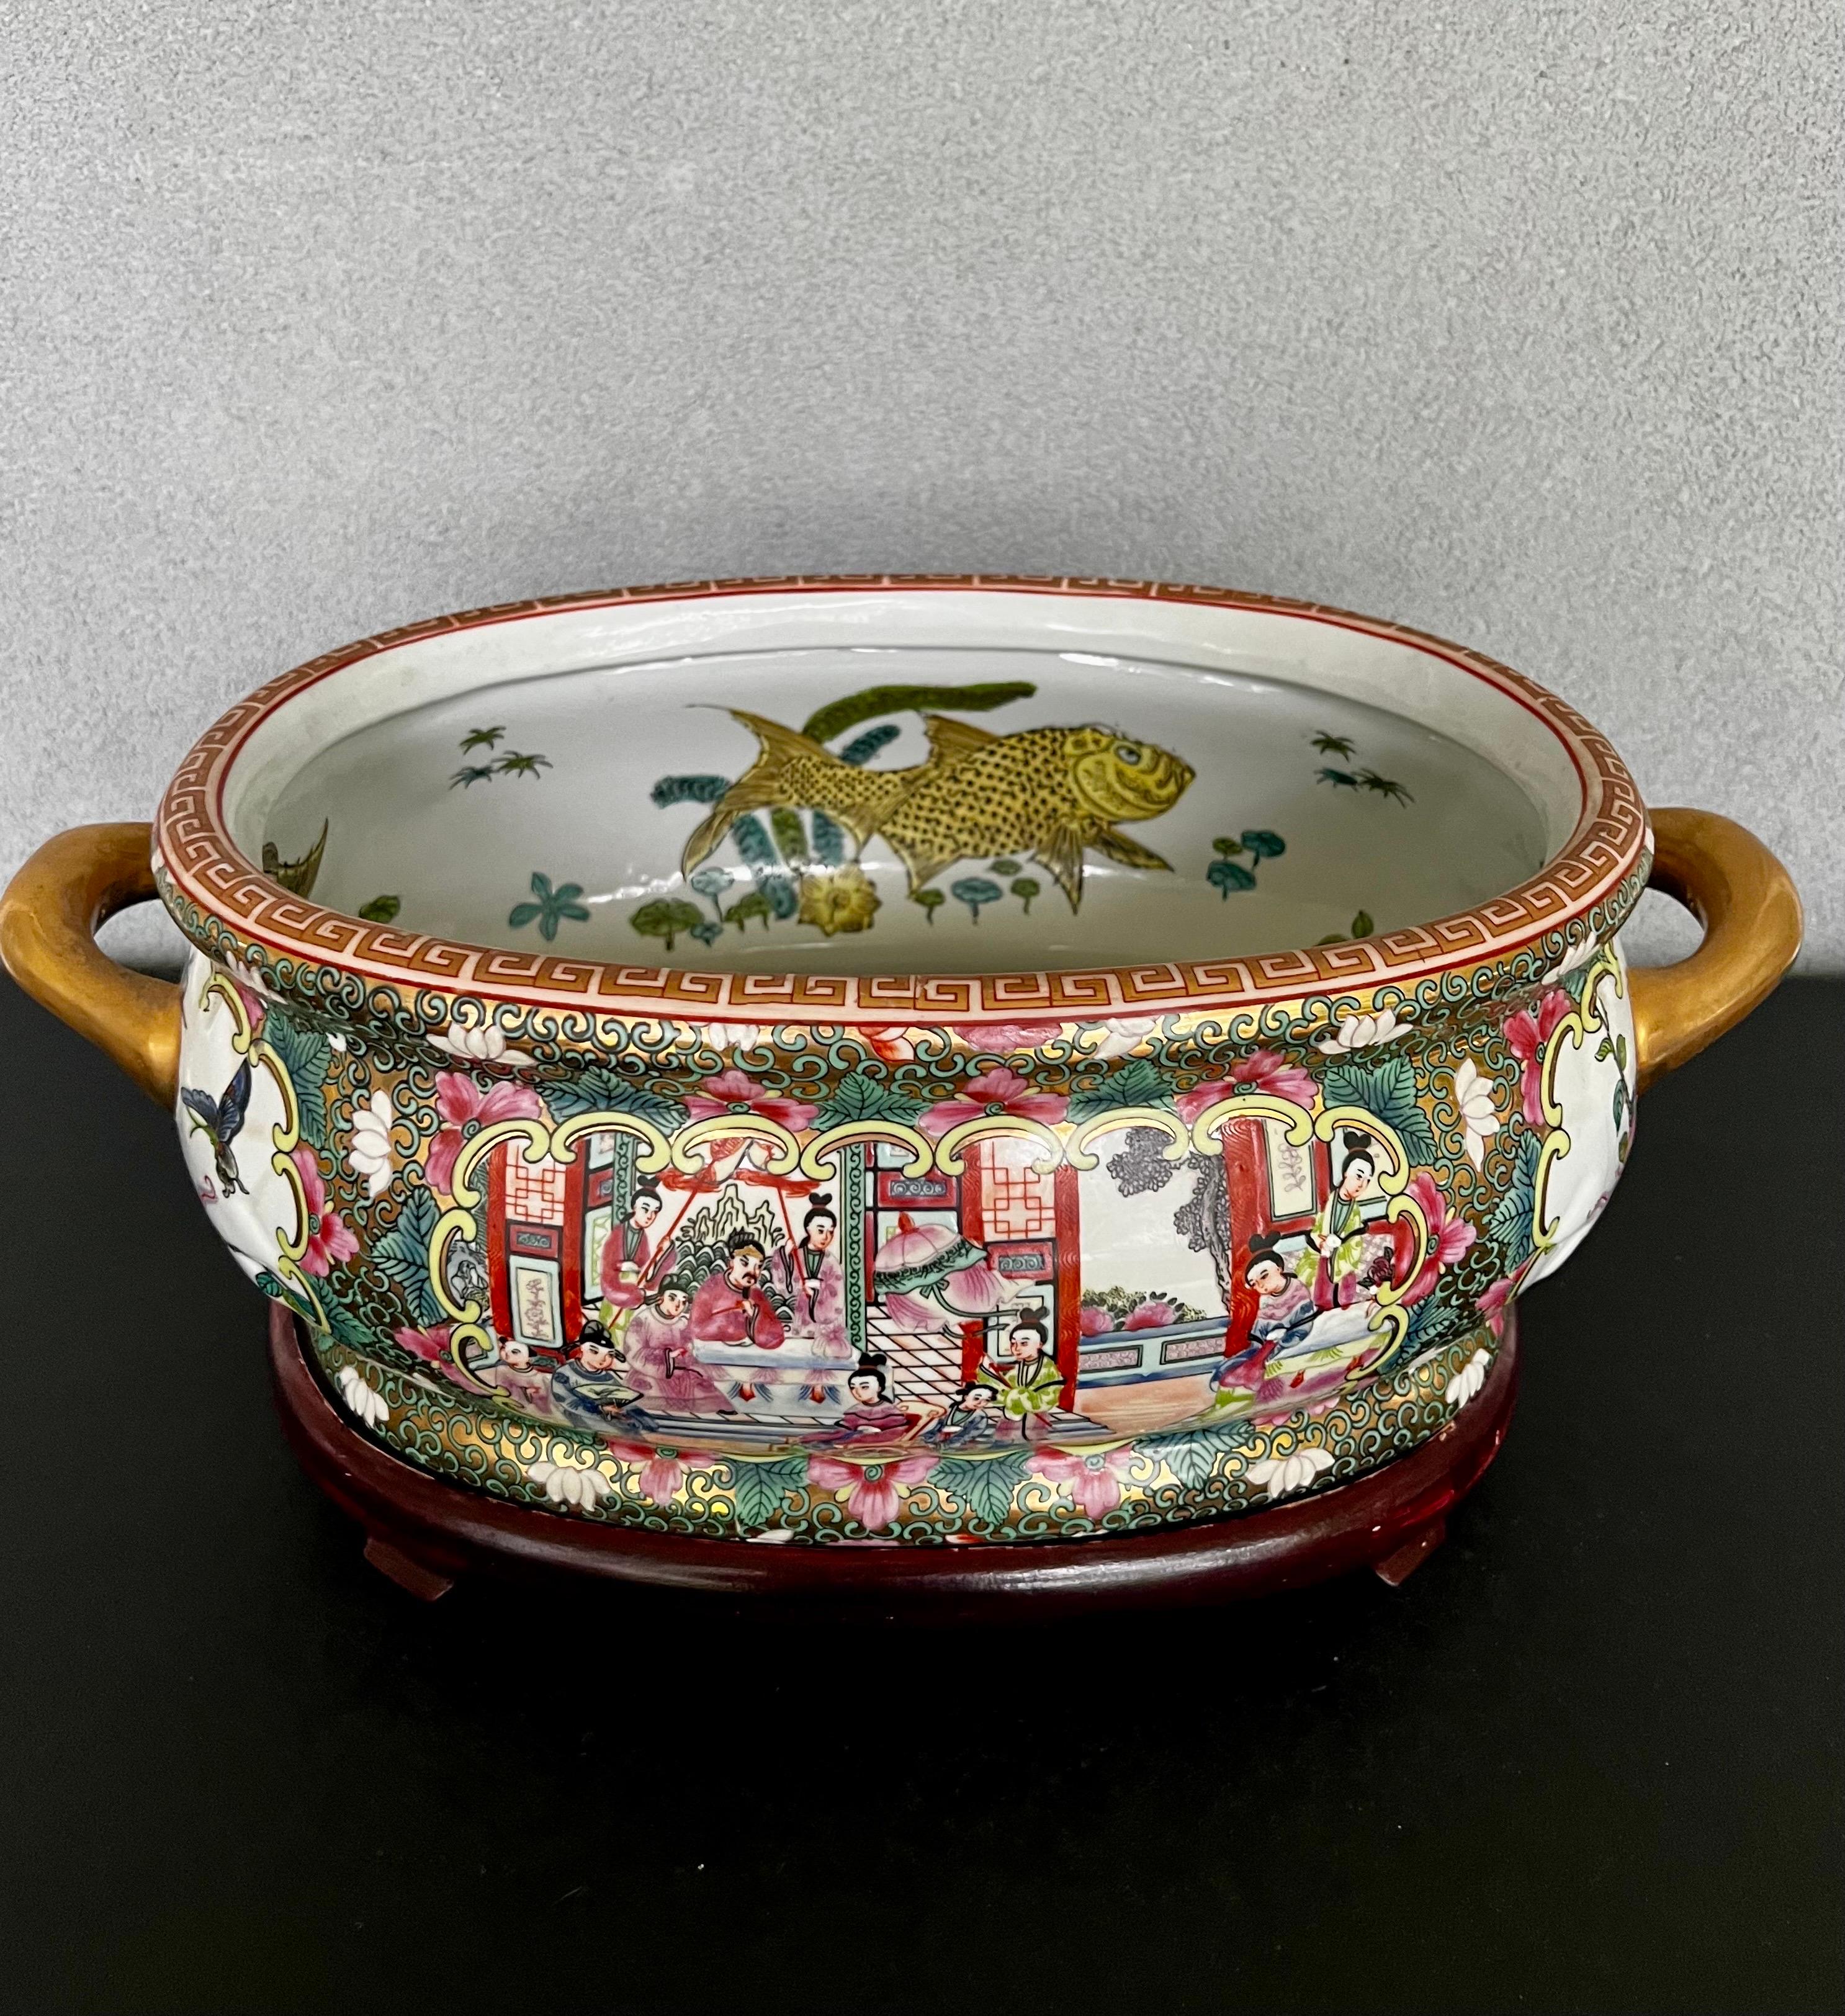 Stunning vintage Rose Medallion Hand Painted Porcelain Footbath with wooden stand.  
This footbath has been beautifully painted with pink, green and gold being the primary colors, it’s beautiful and would be an statement piece in your home, you can